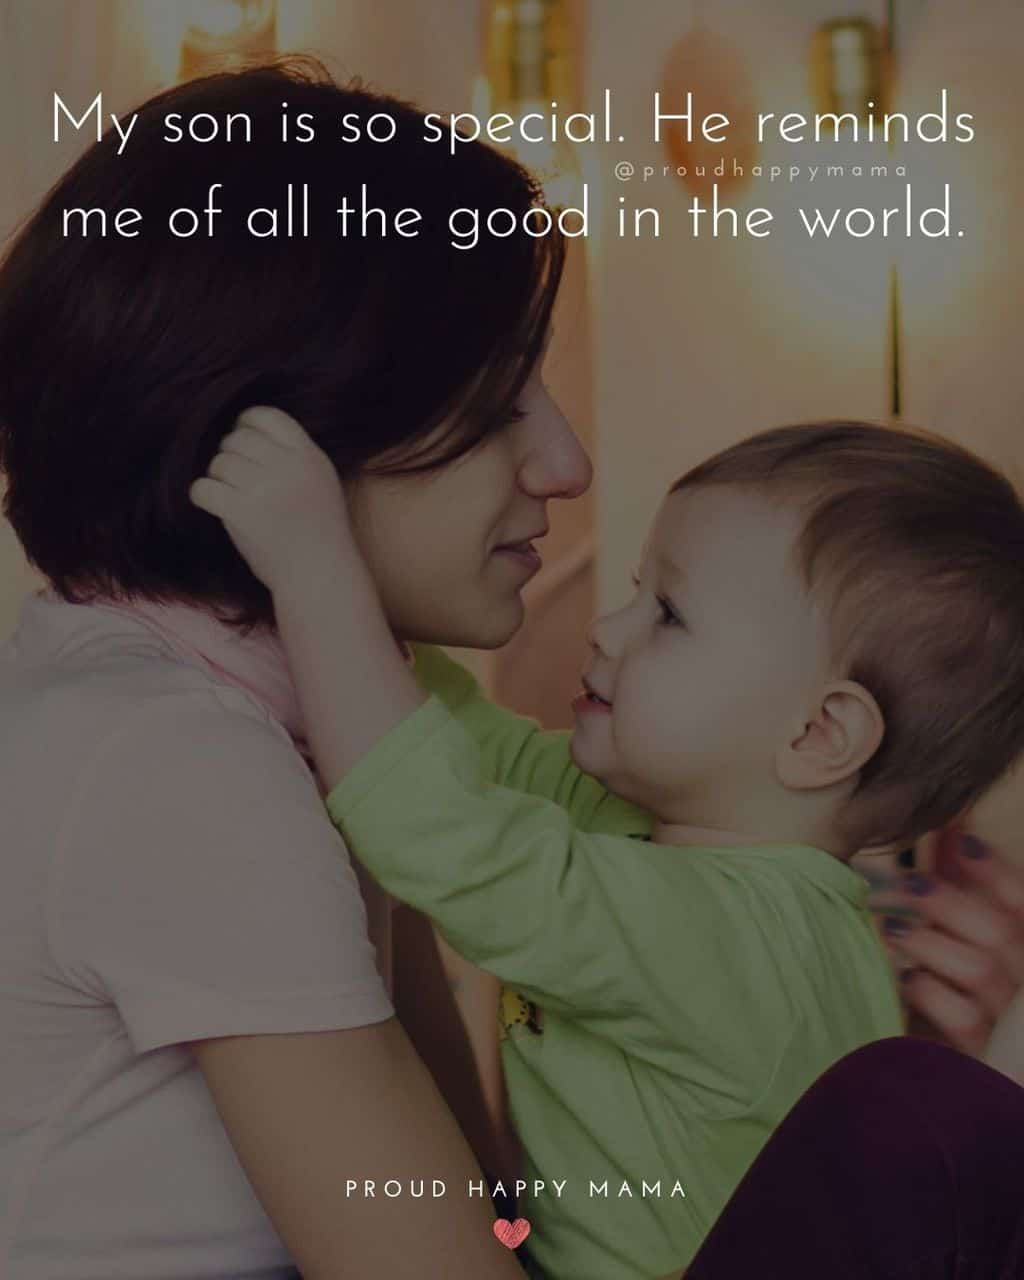 Son Quotes - My son is so special. He reminds me of all the good in the world.’